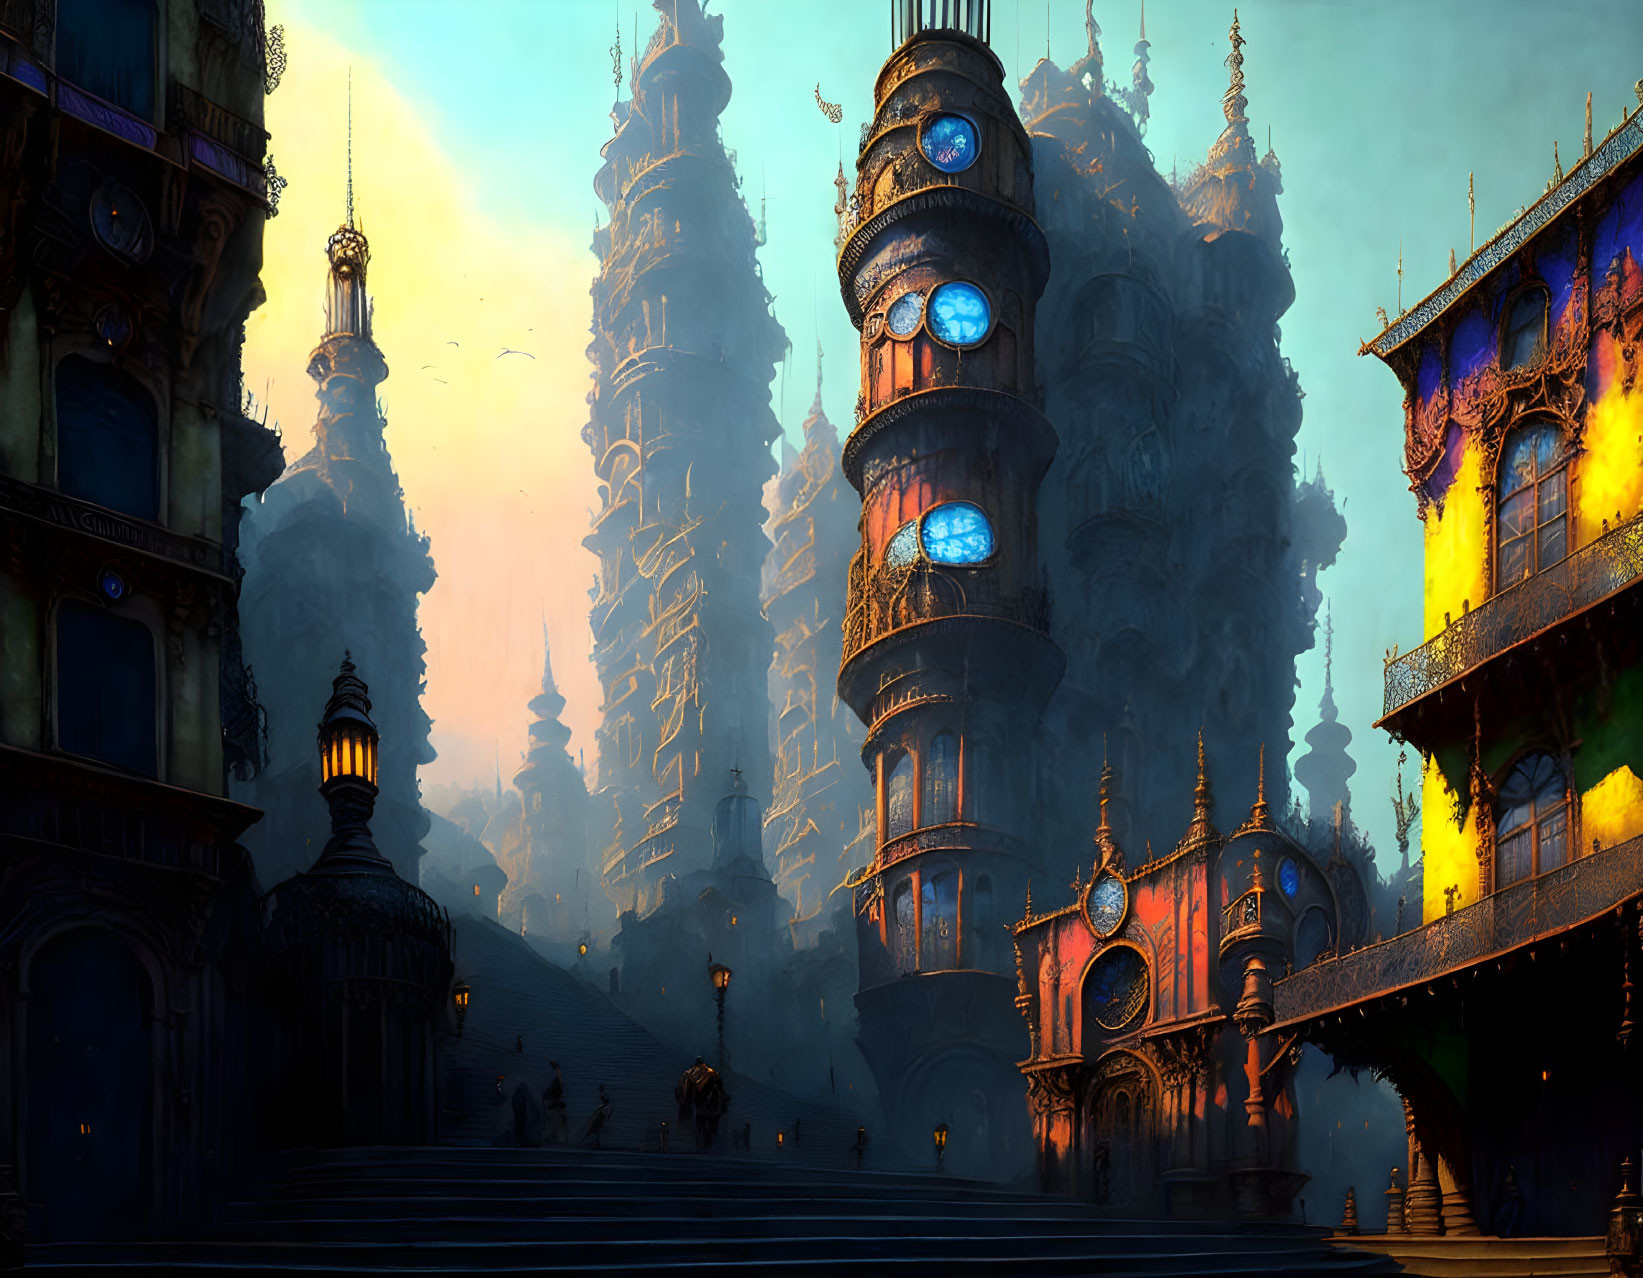 Ornate, glowing cityscape at dusk with magical ambiance